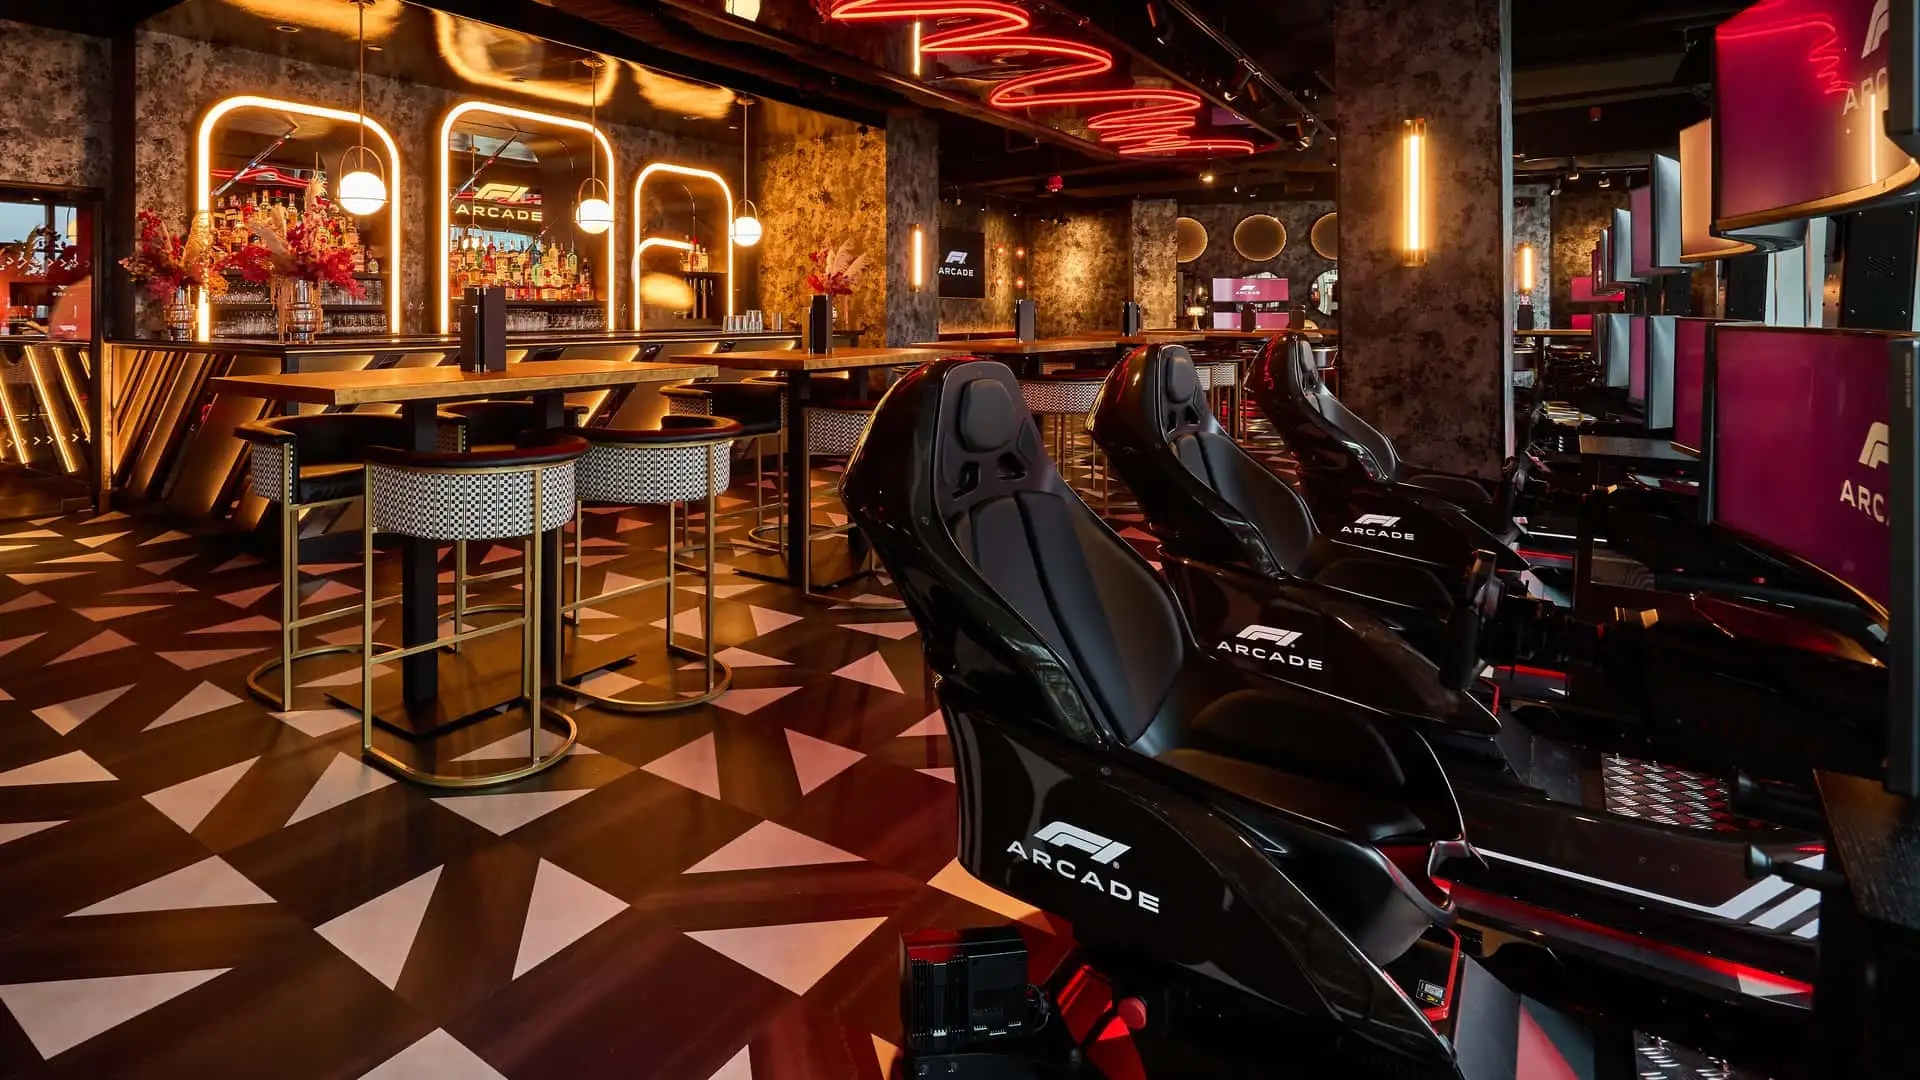 The F1 Arcade restaurant has opened in Boston, offering delicious food and a ride behind the wheel of a Formula 1 car